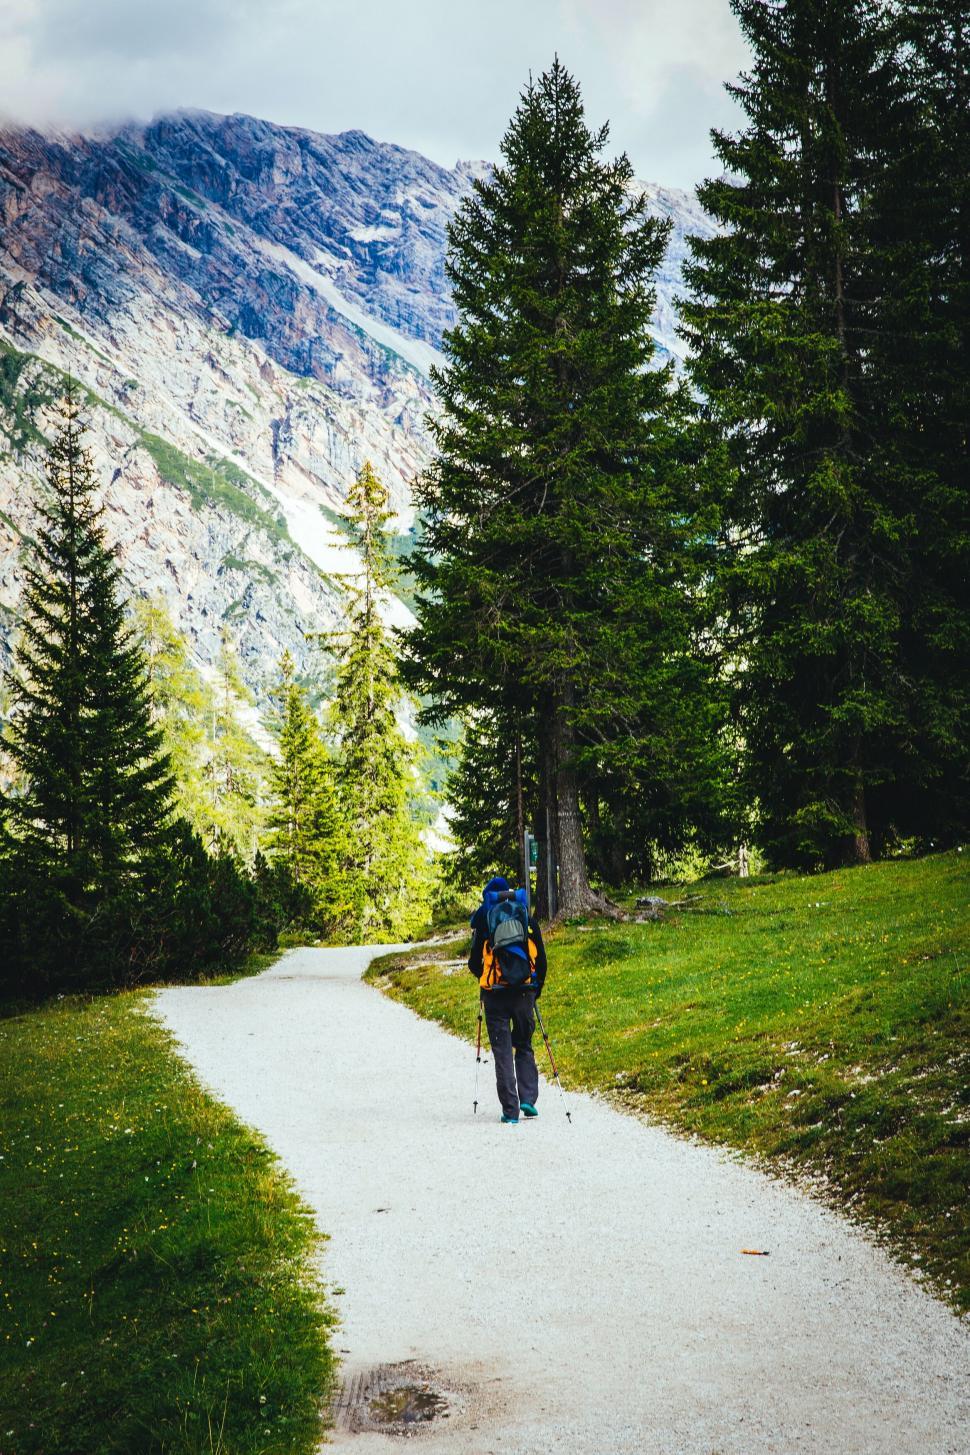 Free Image of Hiker on a scenic mountain trail with backpack 